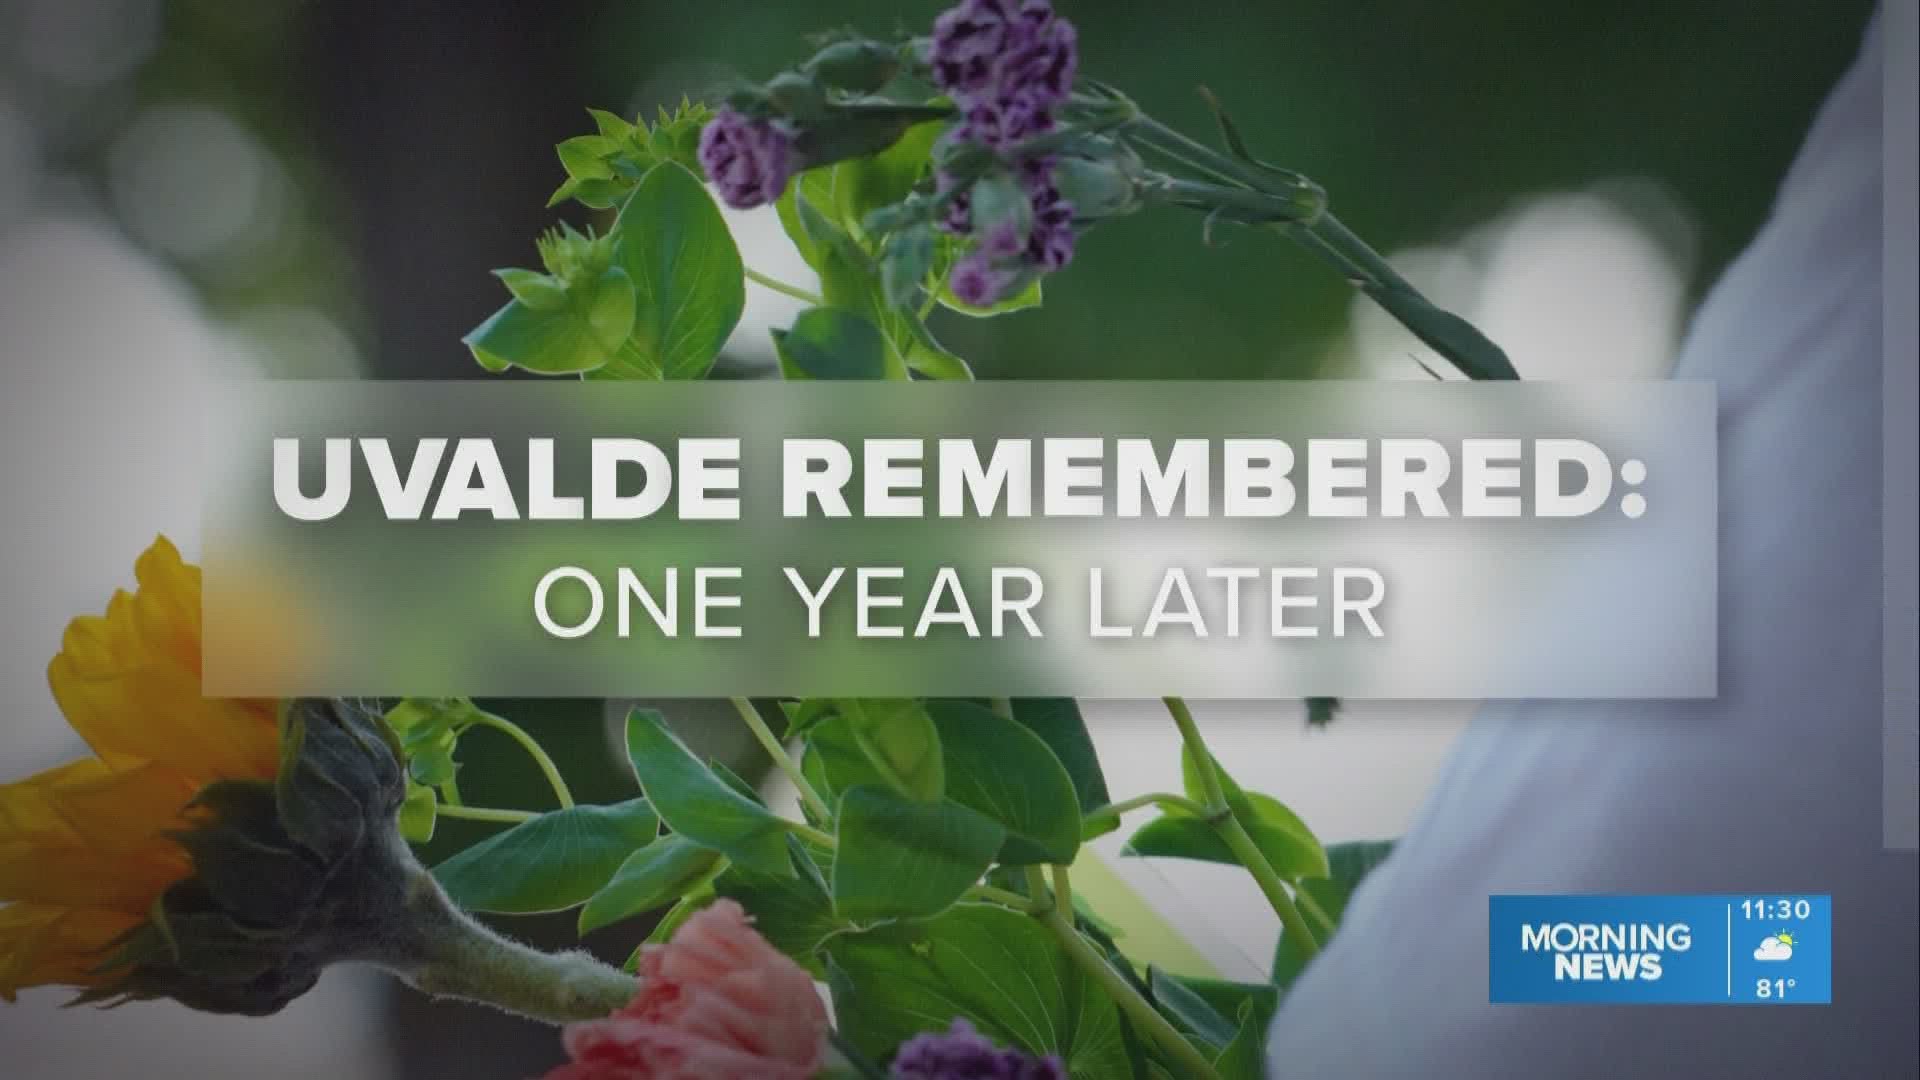 It’s been one year since the massacre at Robb Elementary School, where 19 children and two teachers lost their lives.